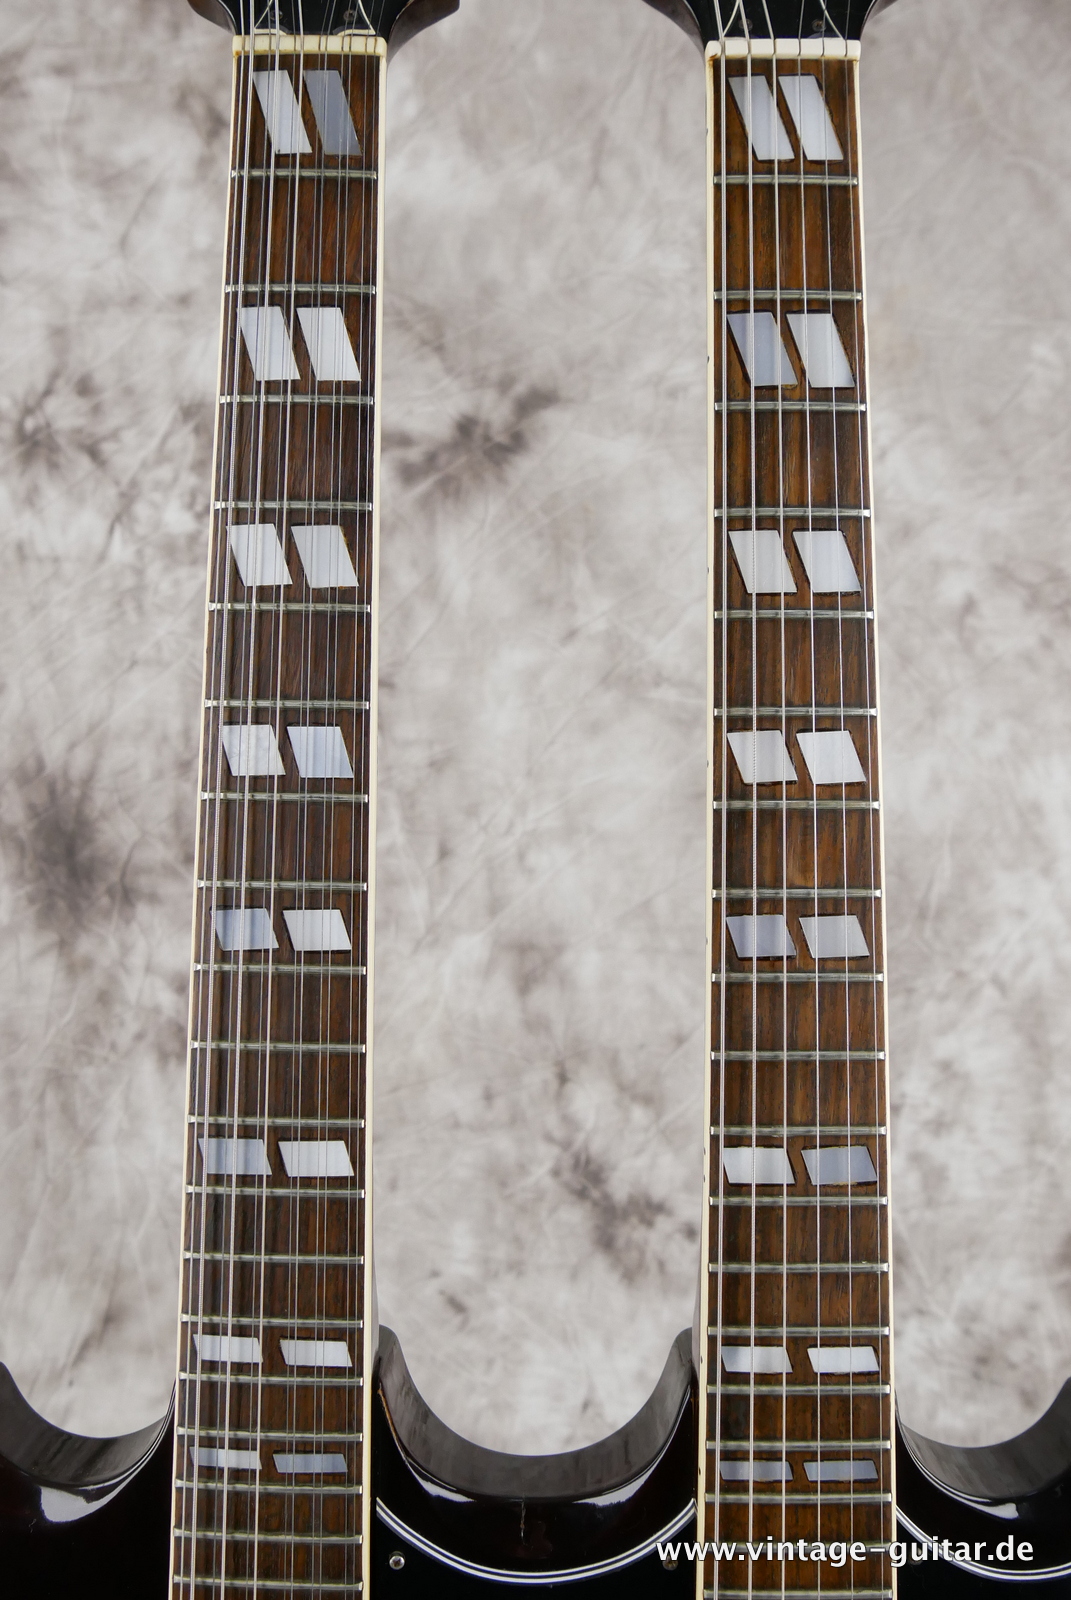 Ibanez_Mod_2402_double_neck_12string_6string_sgstyle_sg_style_1970_70s_stairway_to_heaven-013.JPG